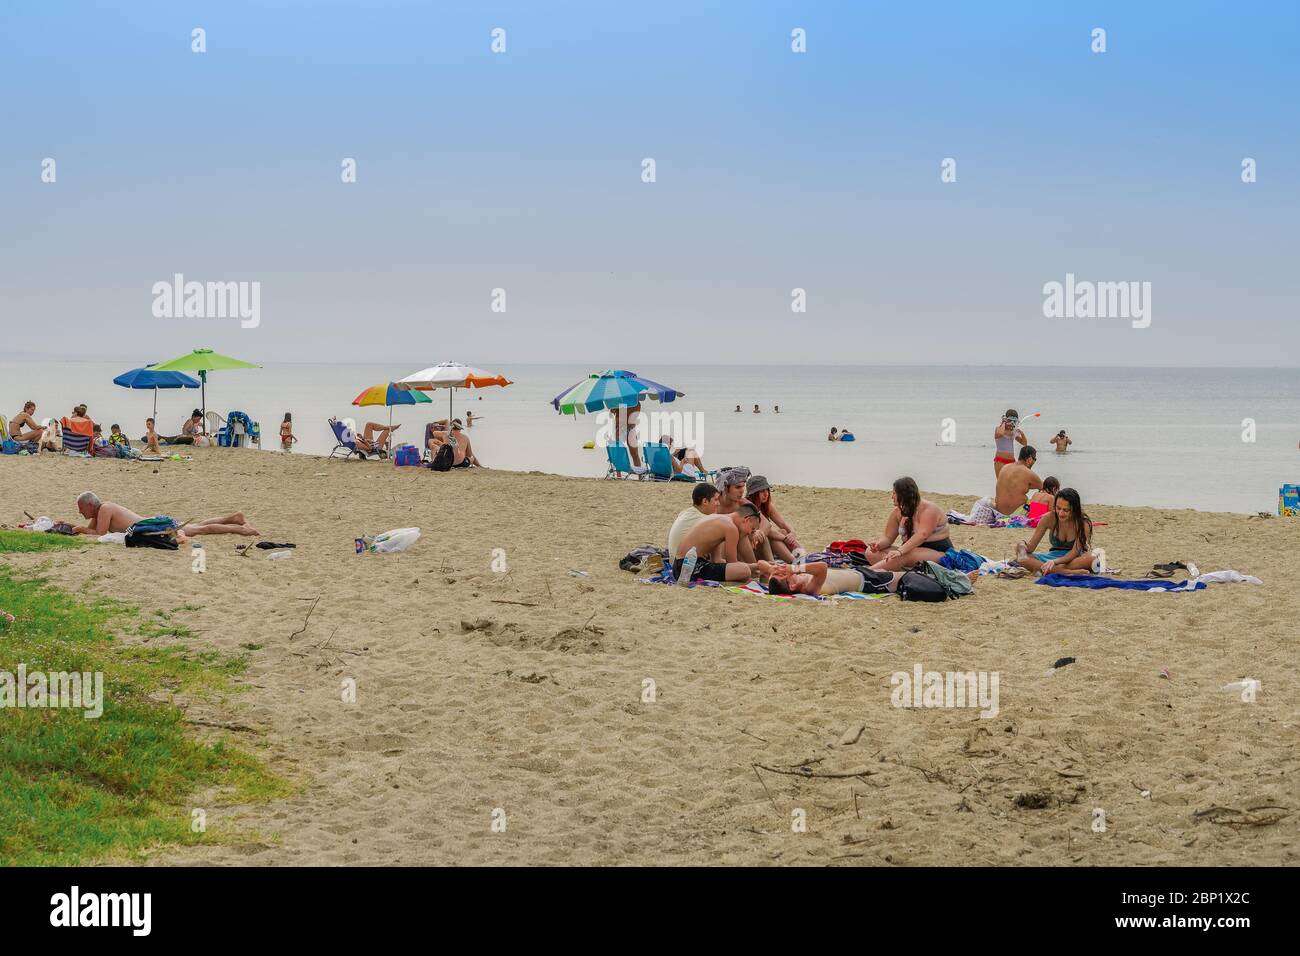 Neoi Epivates, Greece - May 16 2020: Public beaches open for the summer season. Bathers with sun umbrellas on sand by the sea at Thessaloniki suburbs, after government suggests people keep a distance. Stock Photo